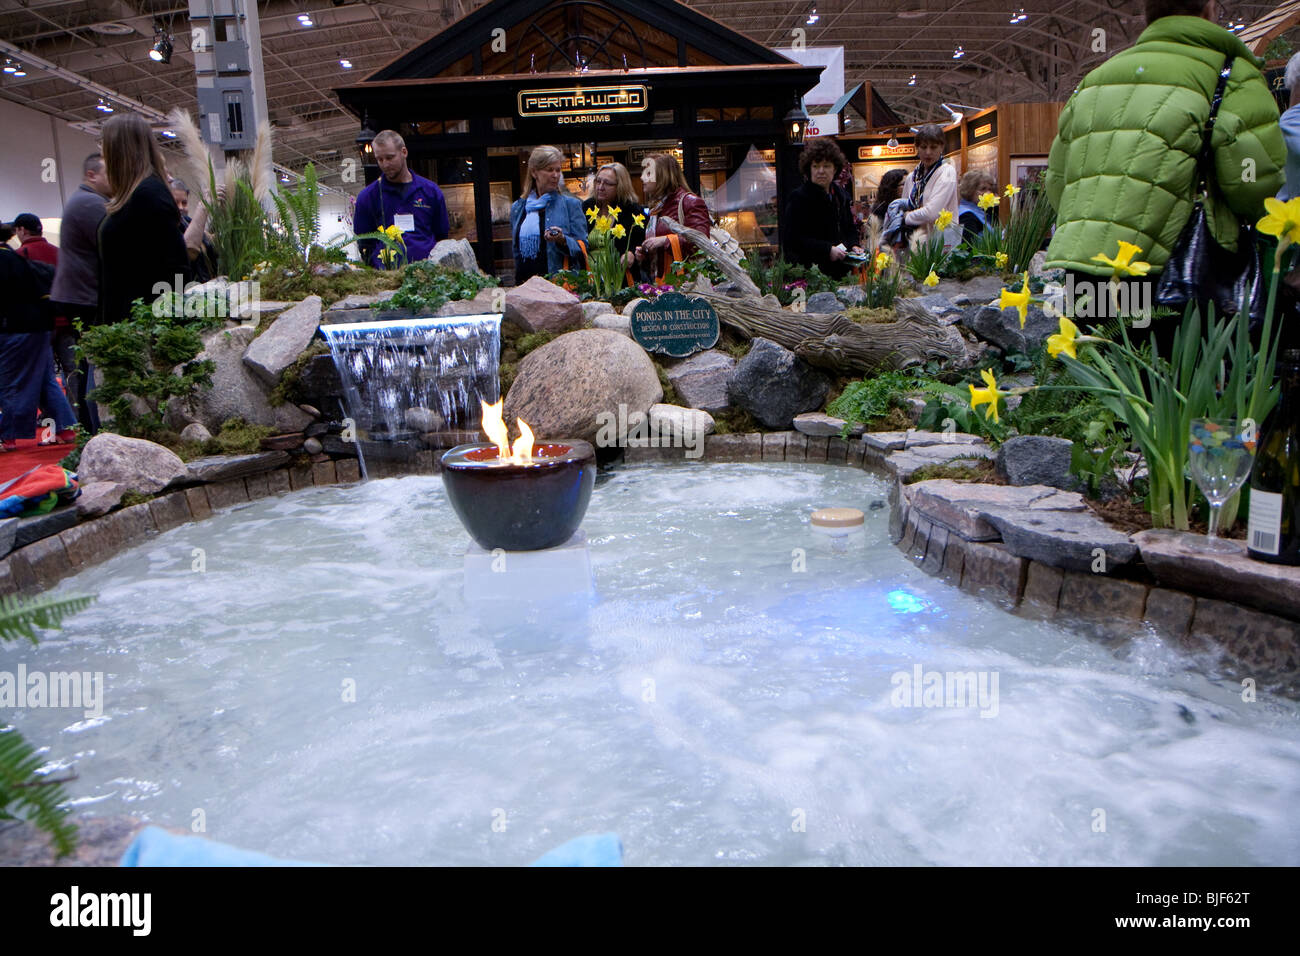 steamy hot tub artificial fire rock stone yellow flower green plant visitors buyers watching Stock Photo